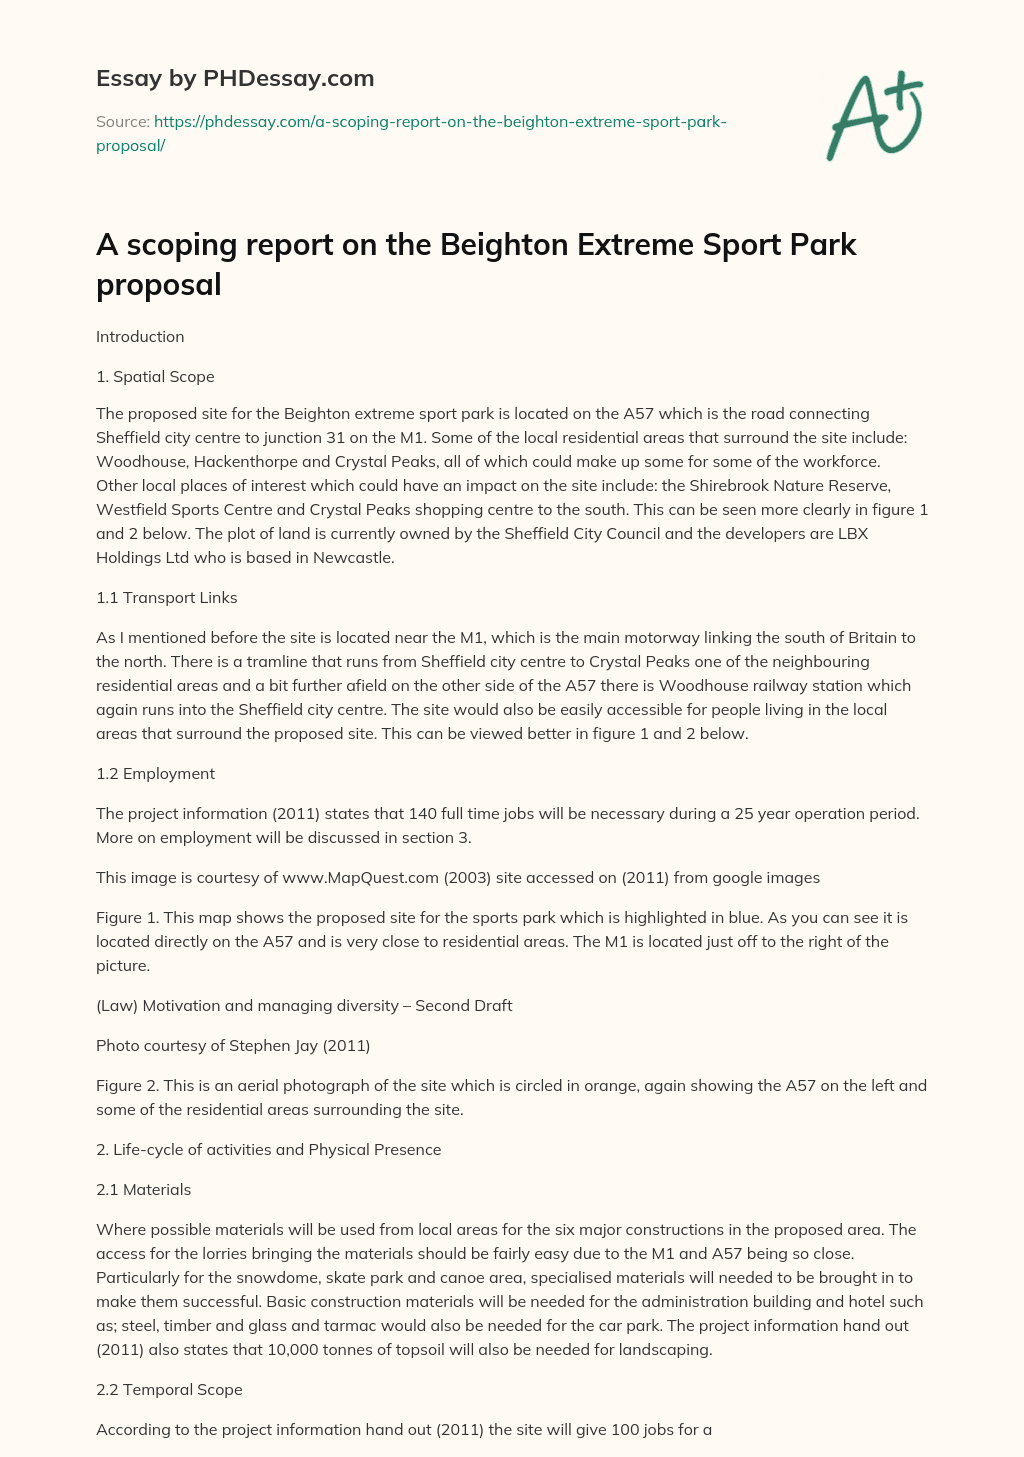 A scoping report on the Beighton Extreme Sport Park proposal essay